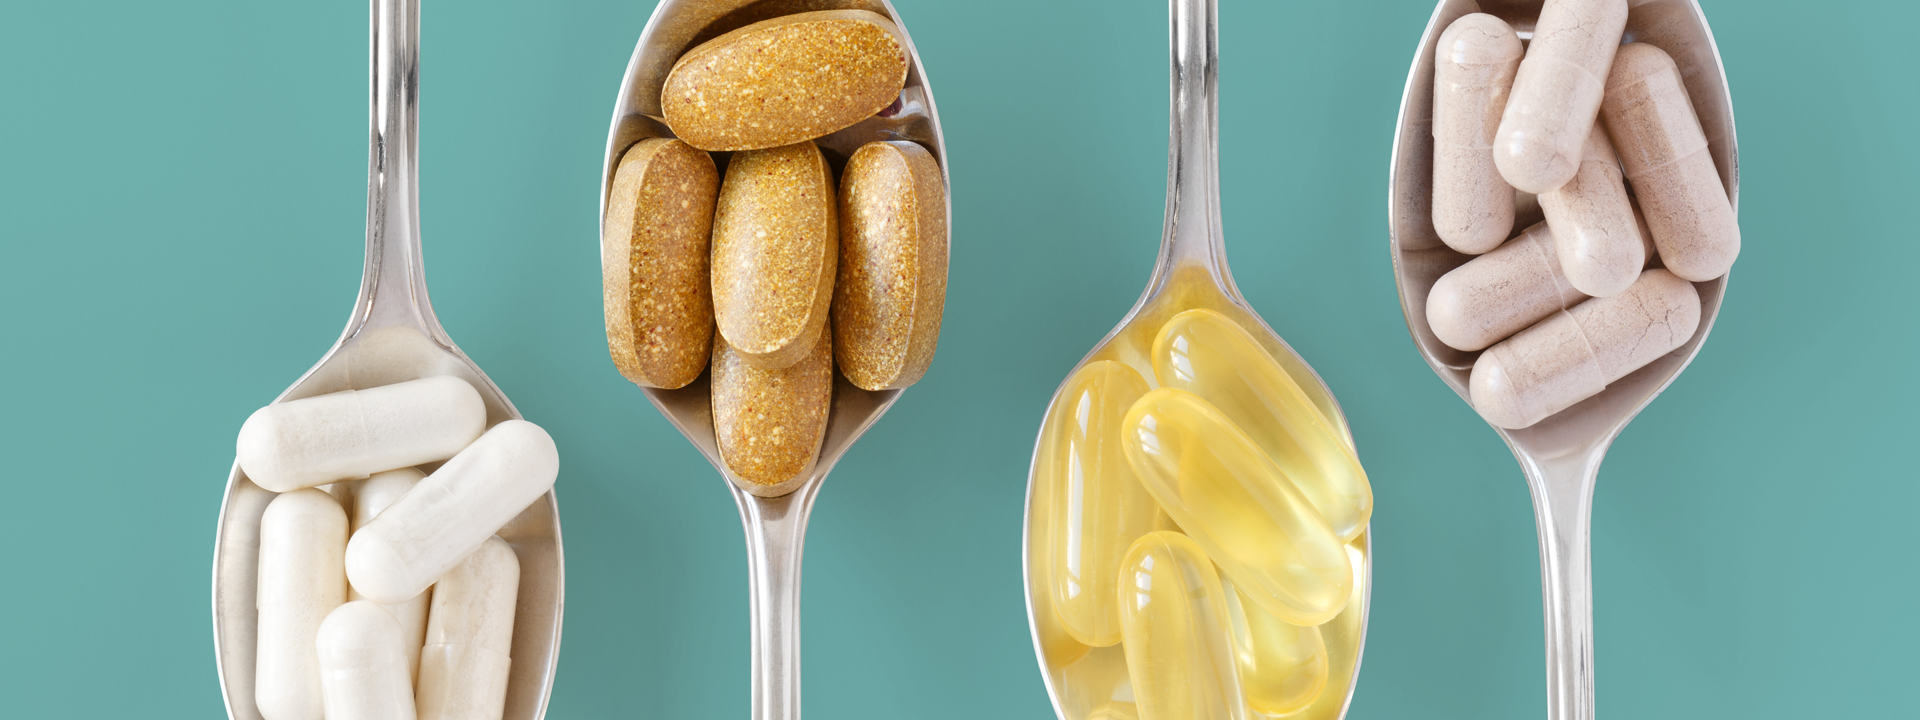 Do I Need Single-Ingredient Supplements if I’m Taking Total Balance?